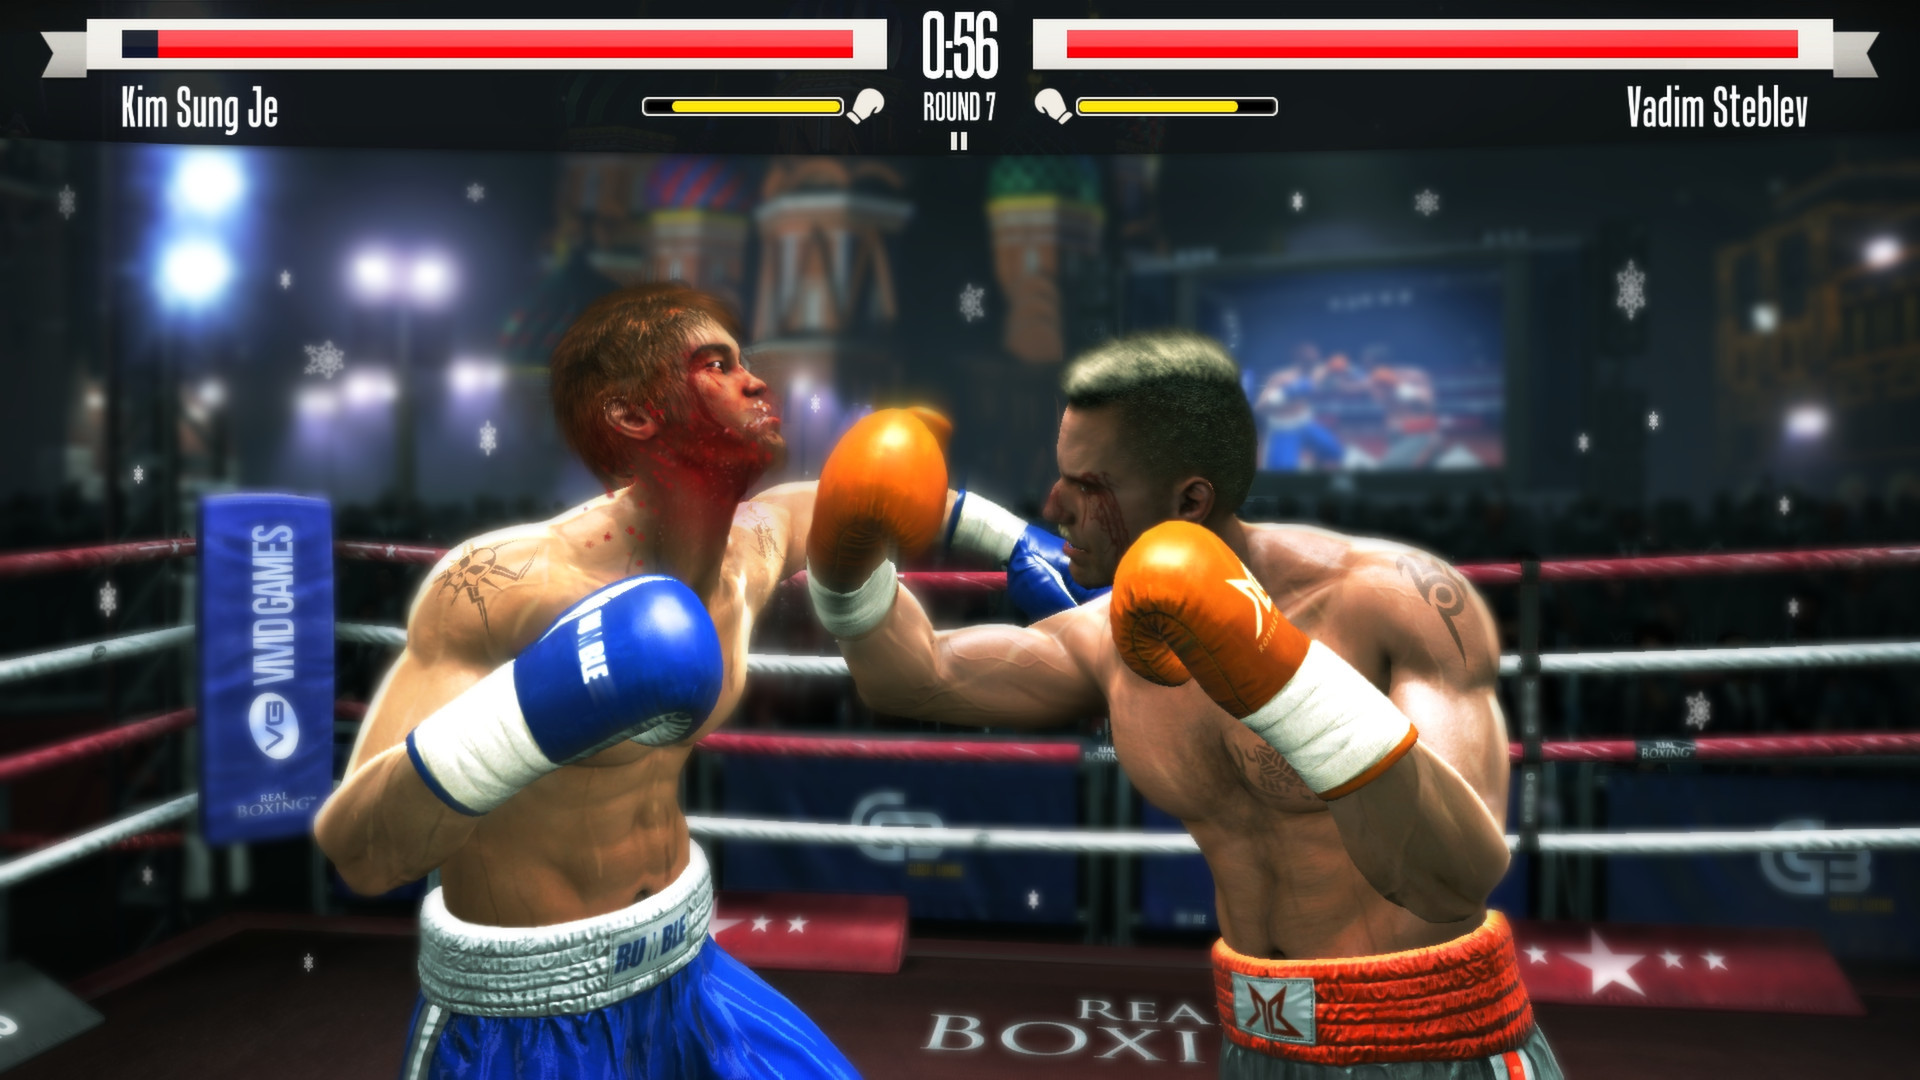 Real Boxing Free Full Download CODEX PC Games